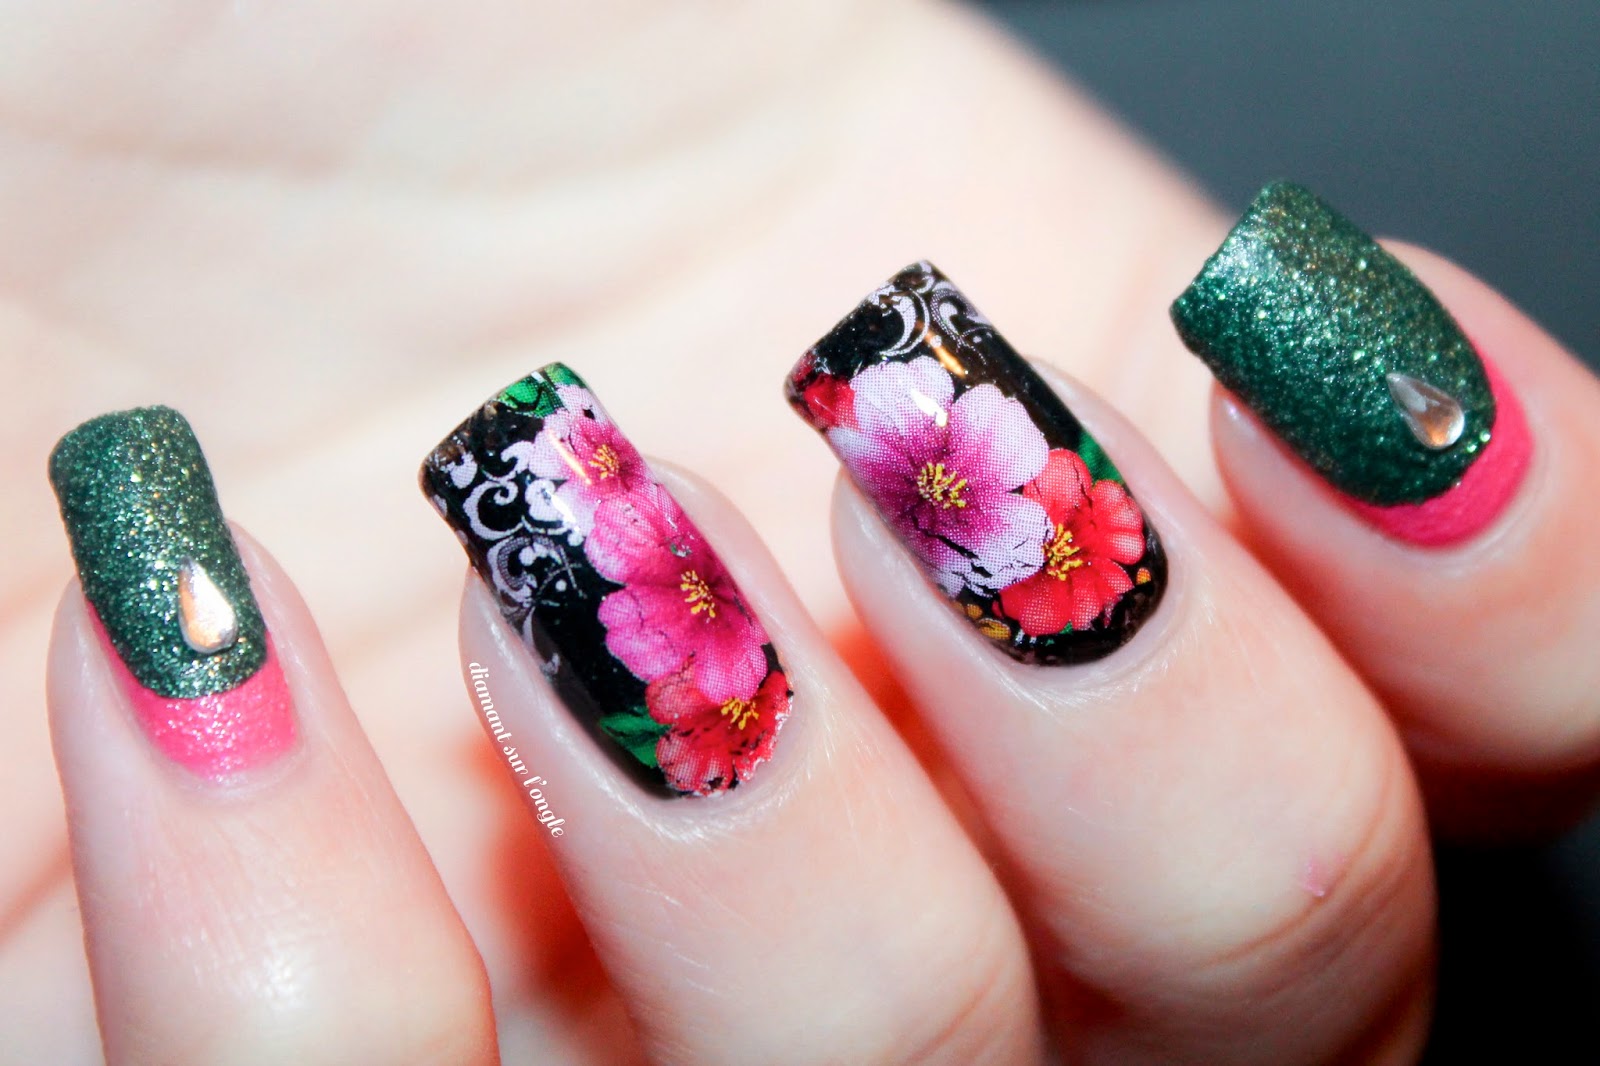 Flowery Nail Art inspired by kitsch english flowers